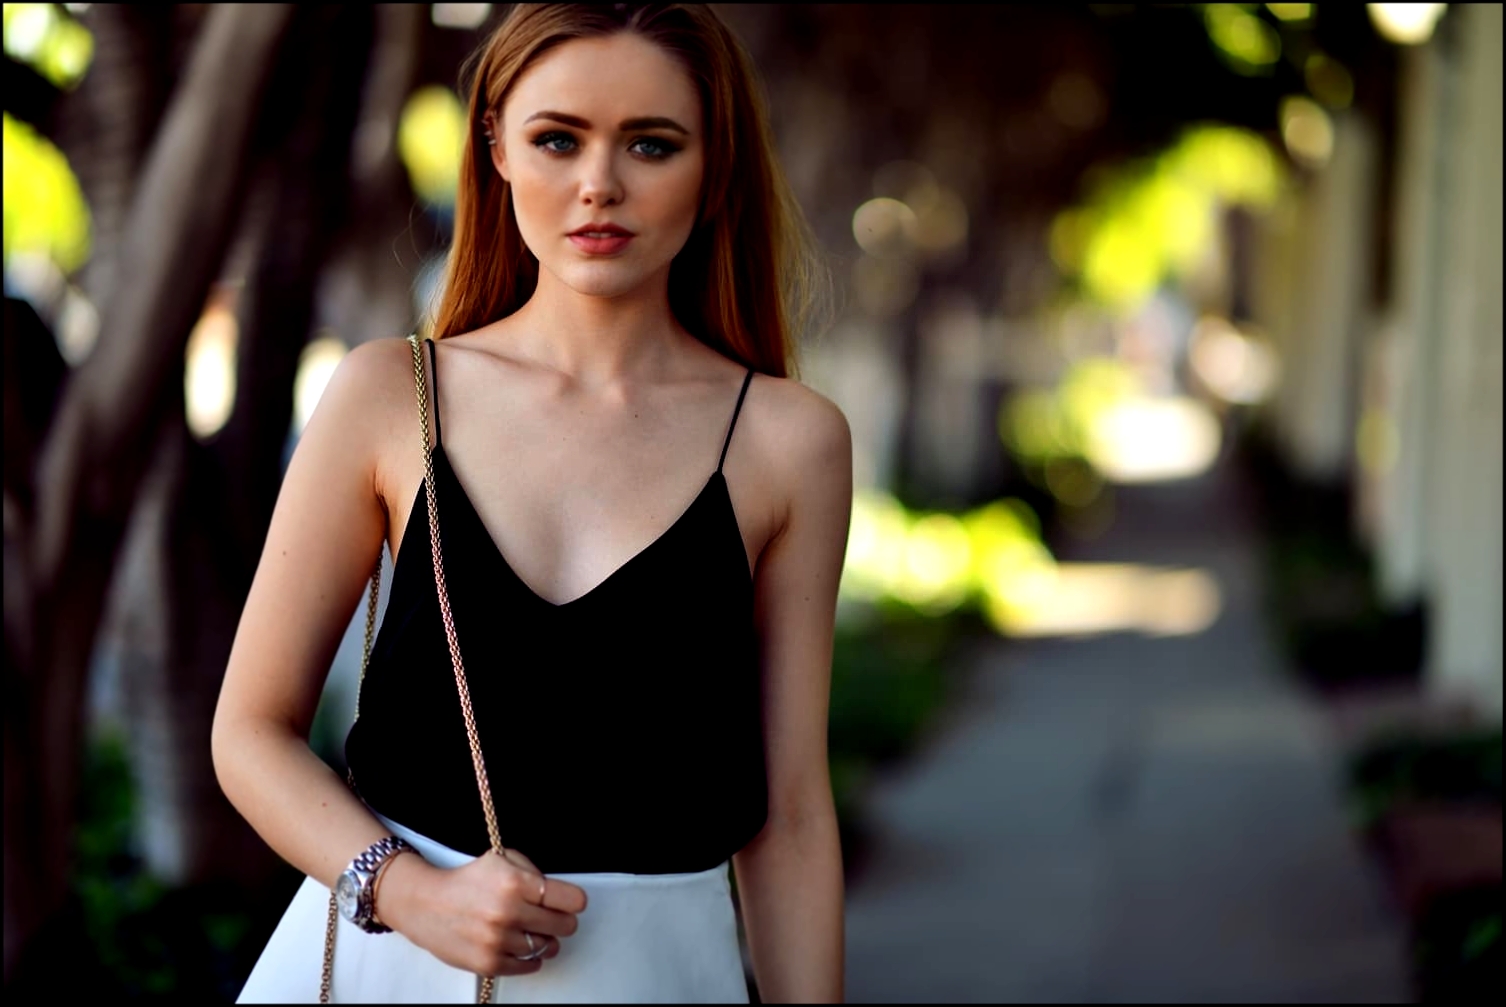 Free Download Kristina Bazan Images on our website with great care. 